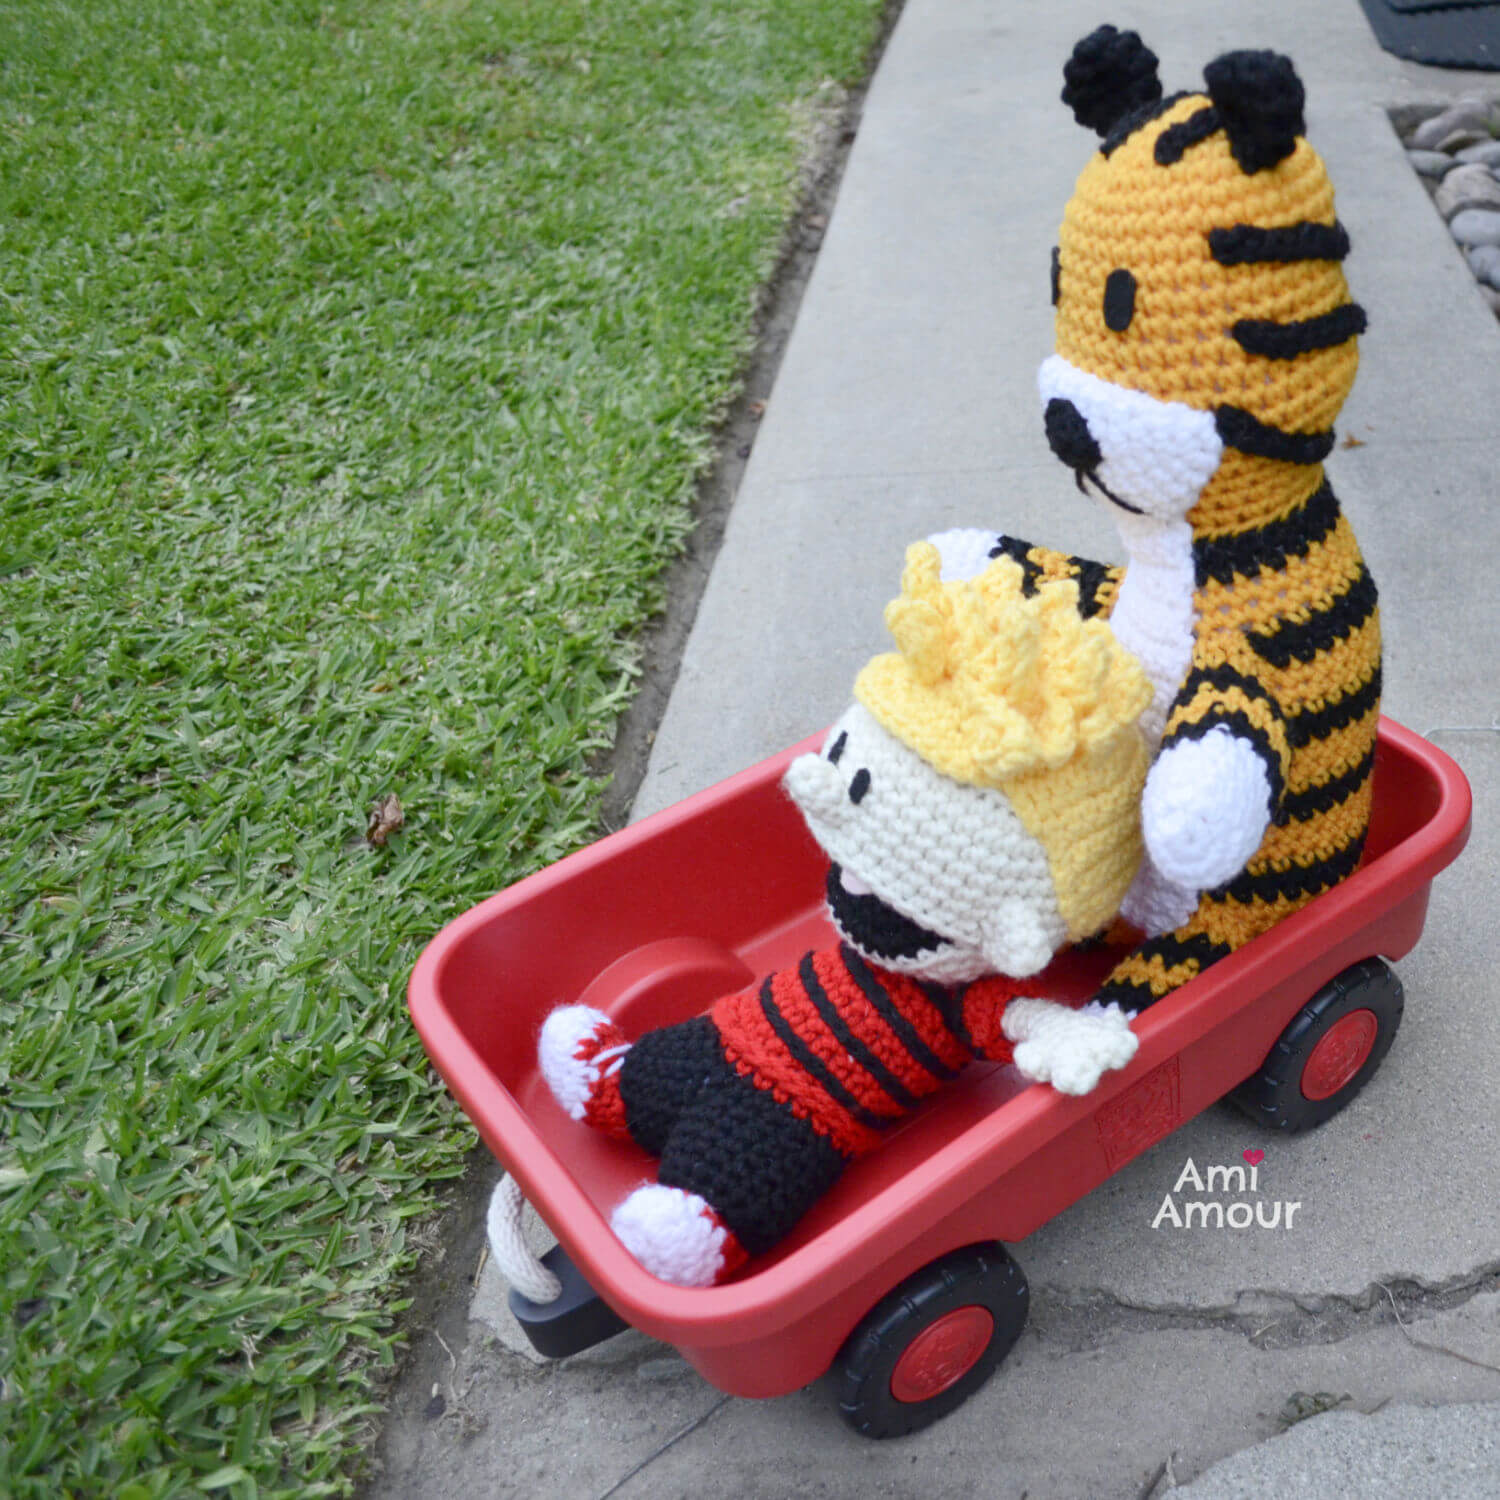 Calvin and Hobbes riding a red wagon